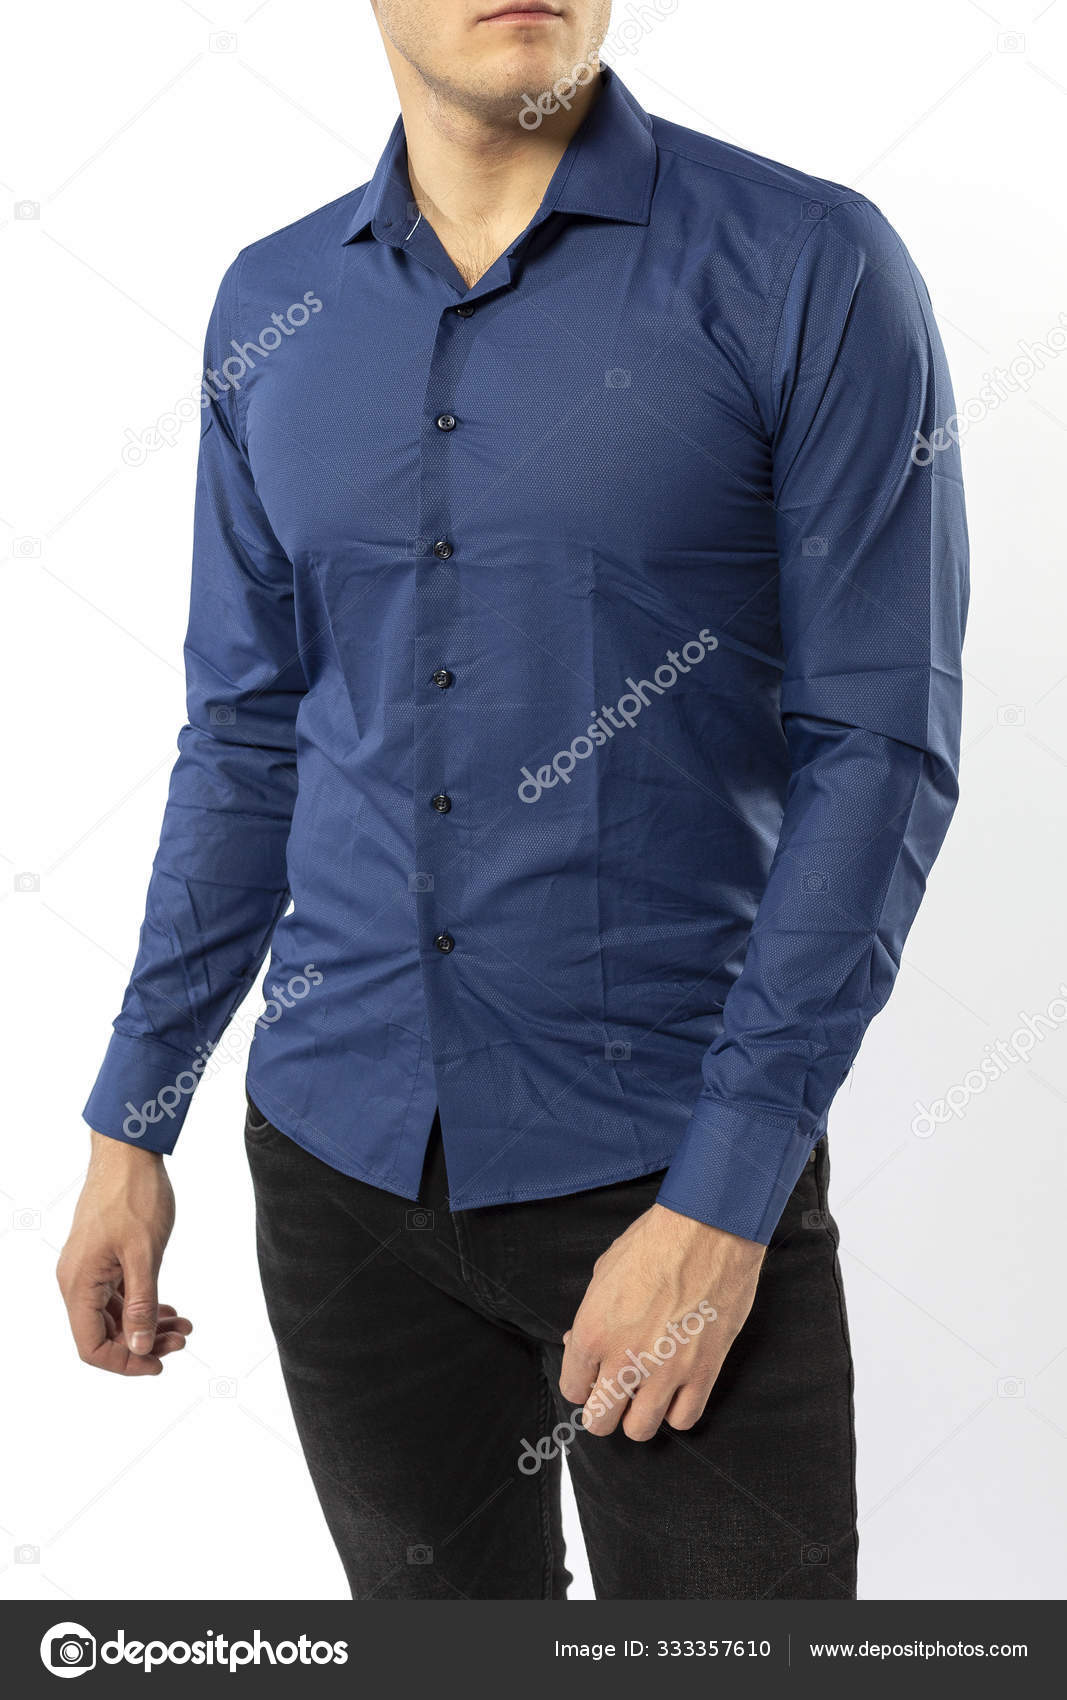 black jeans with blue shirt